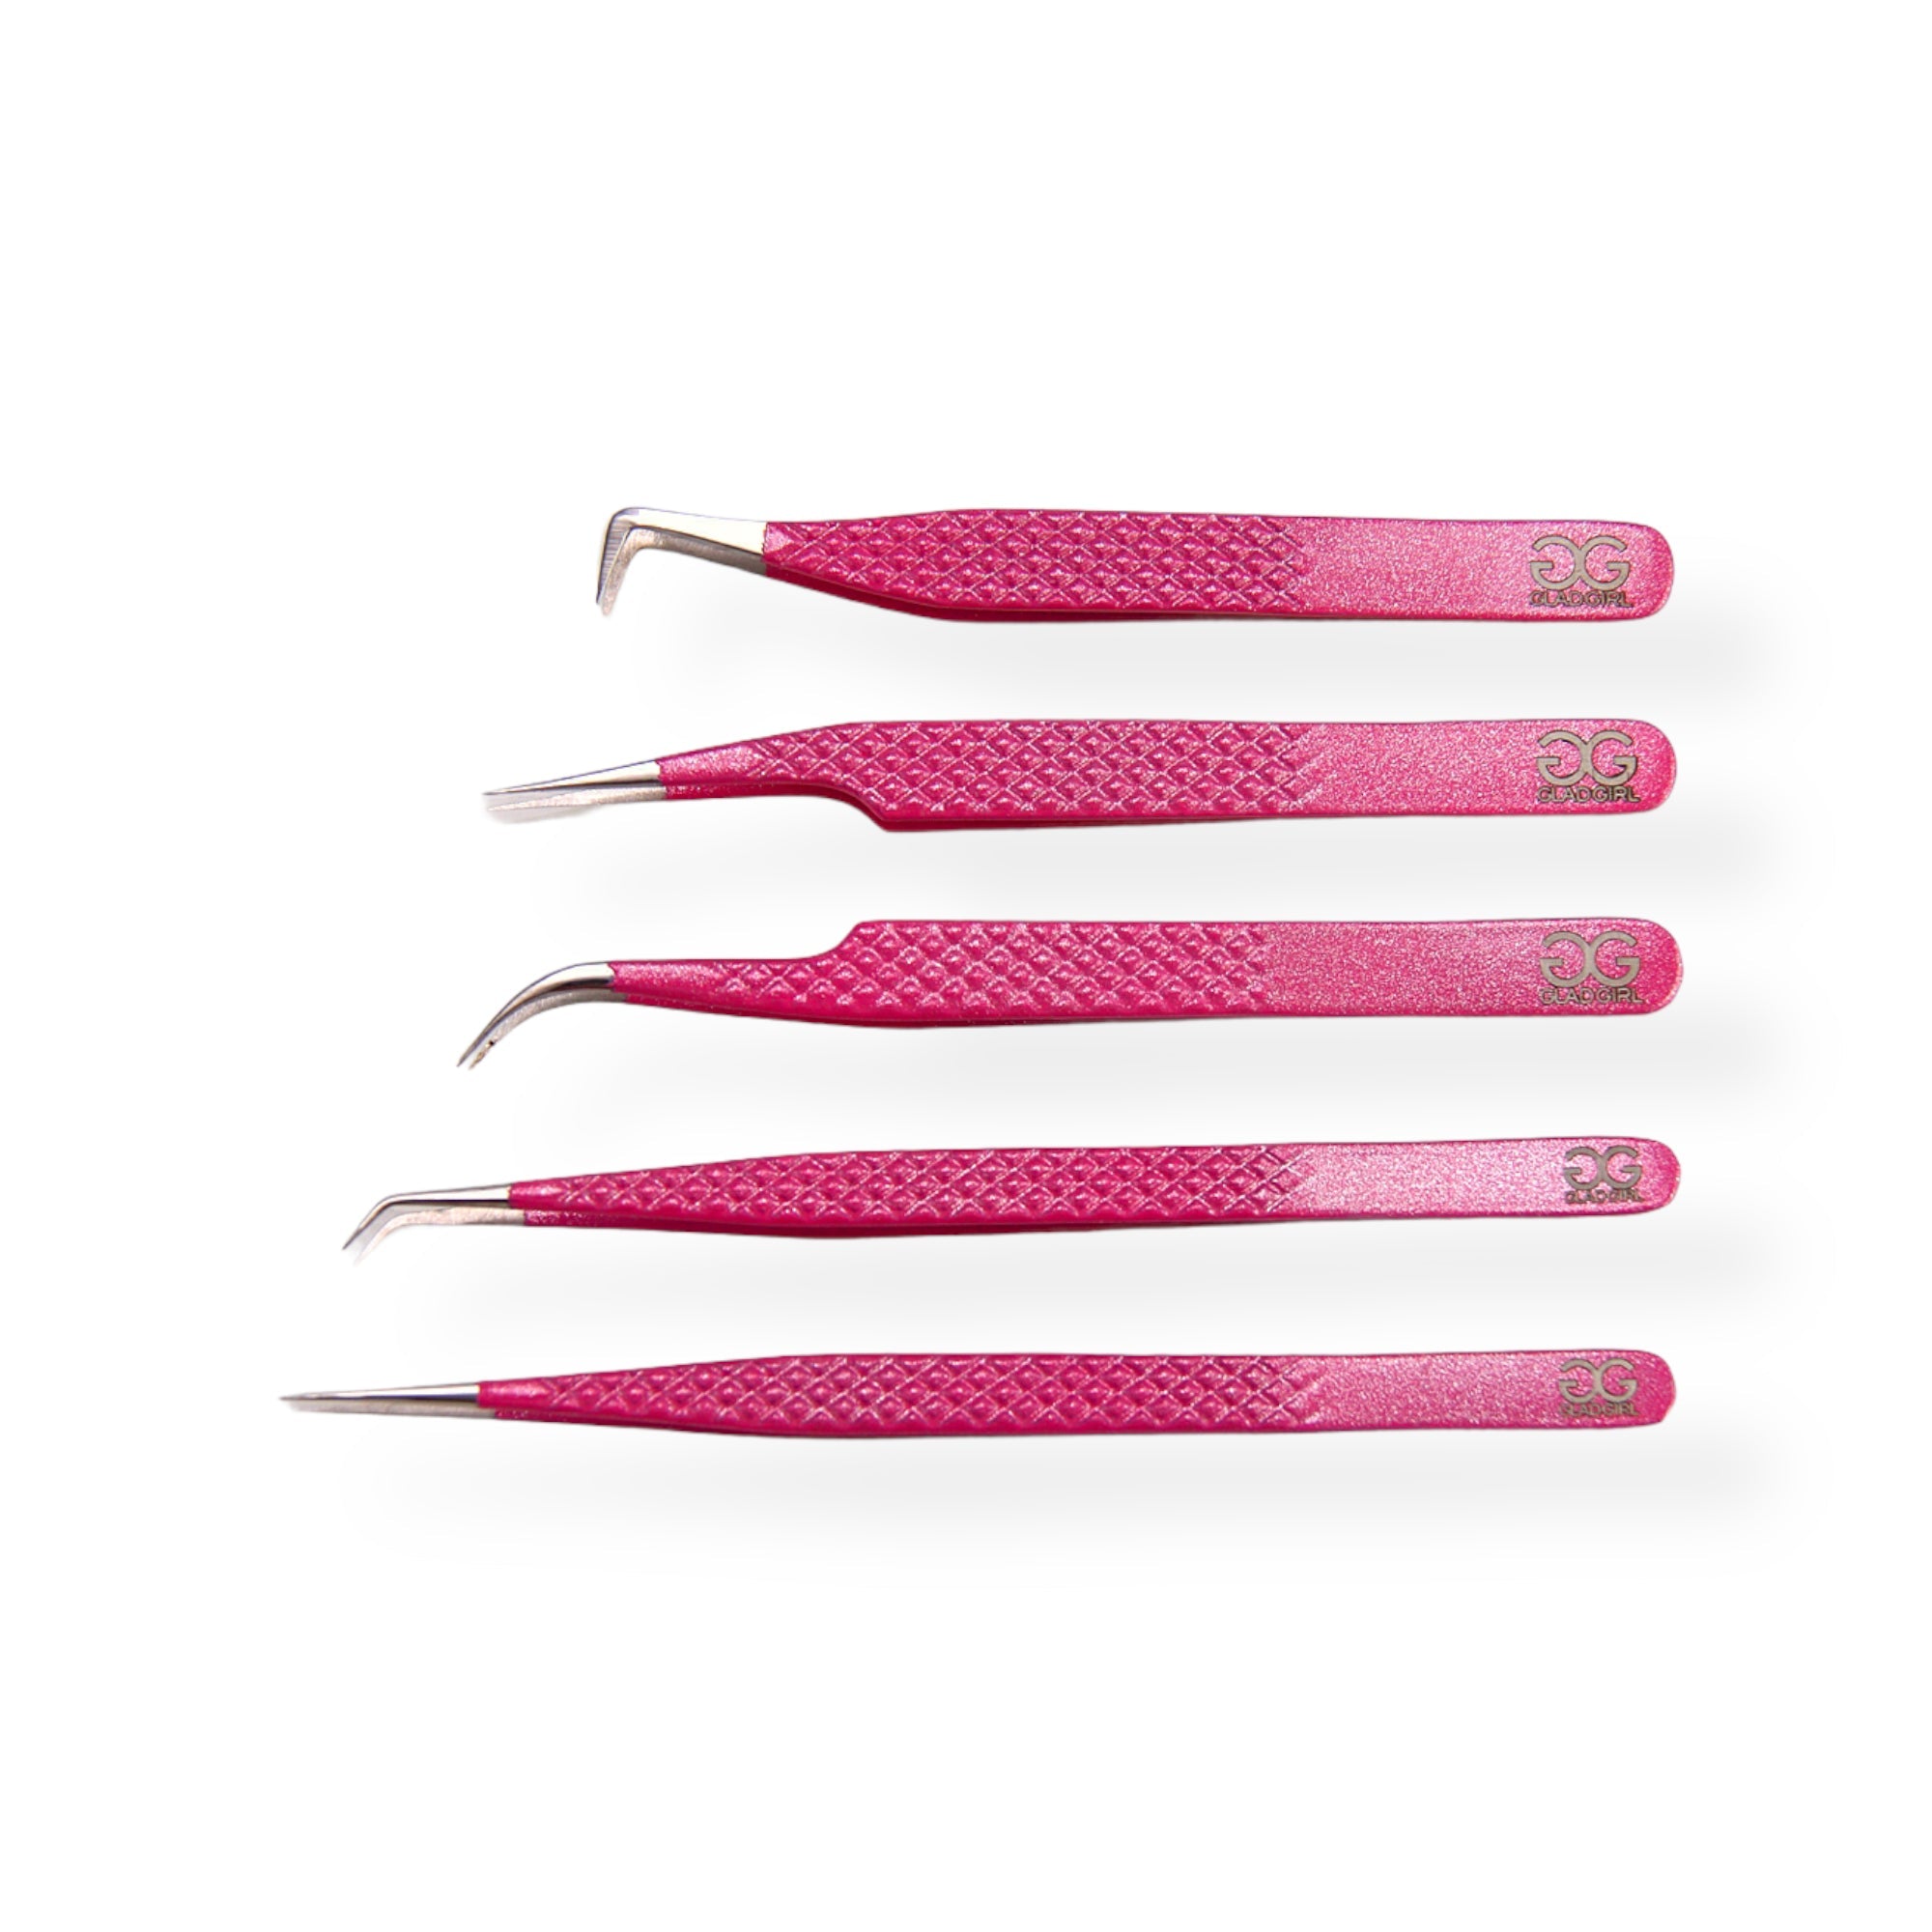 Tweezers for Classic Lashes